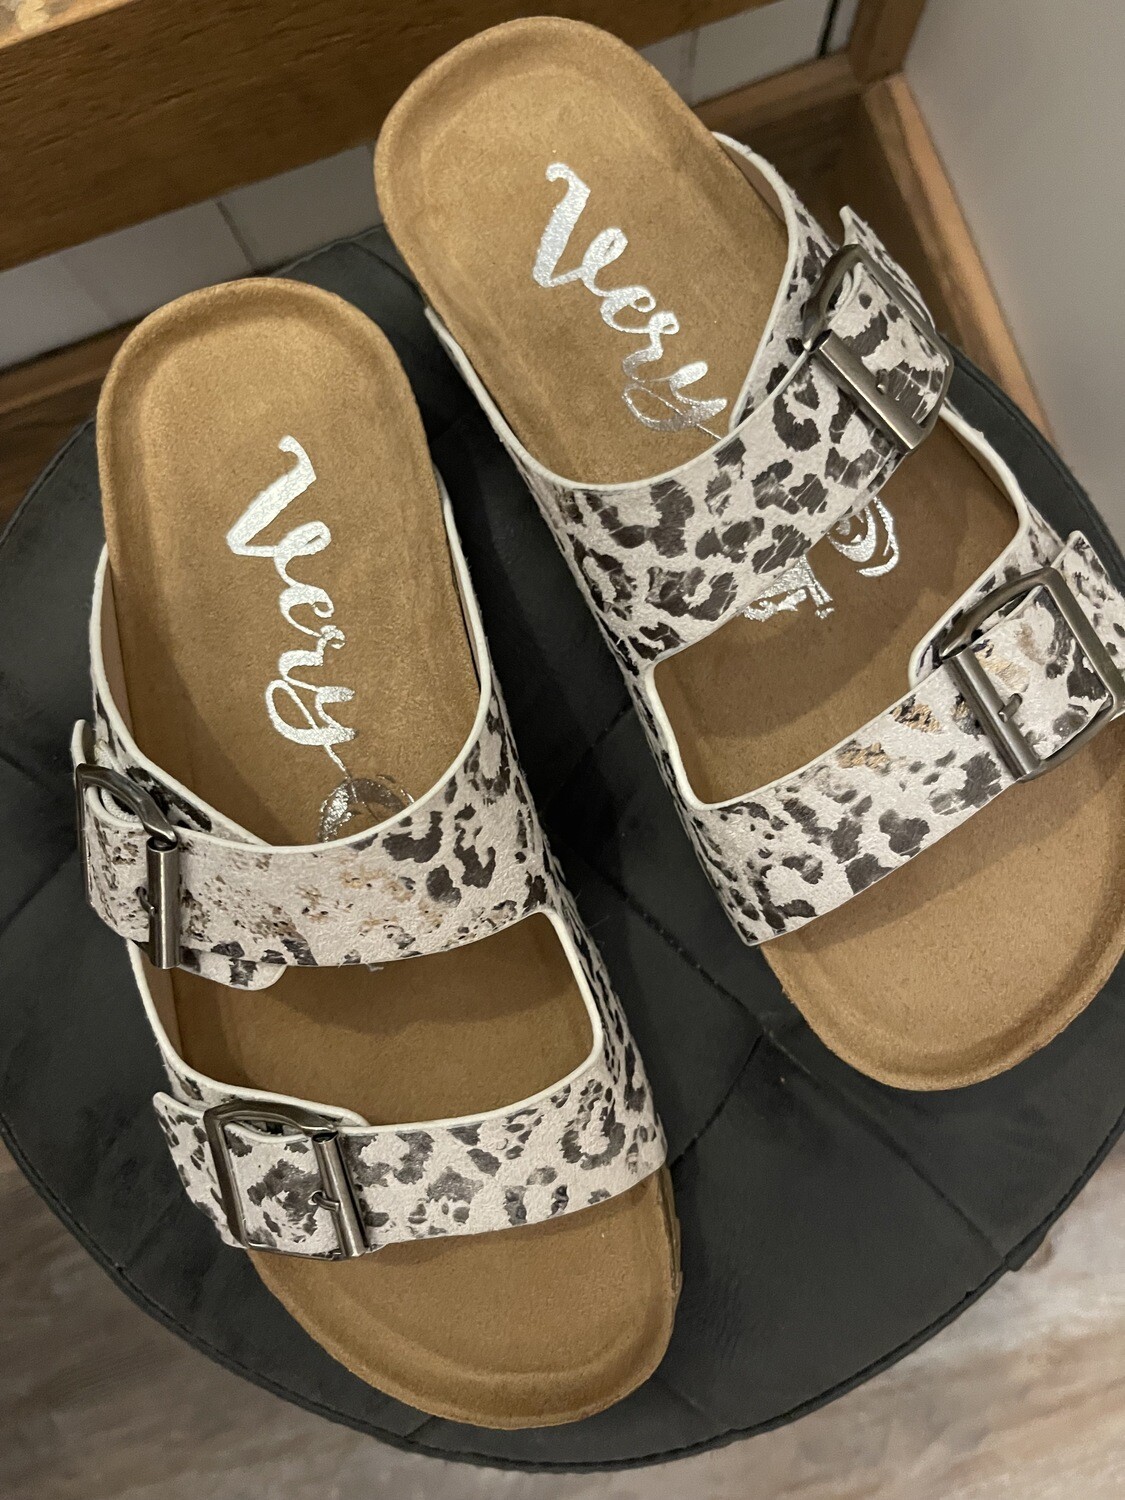 Cheetah Sandals with Buckles